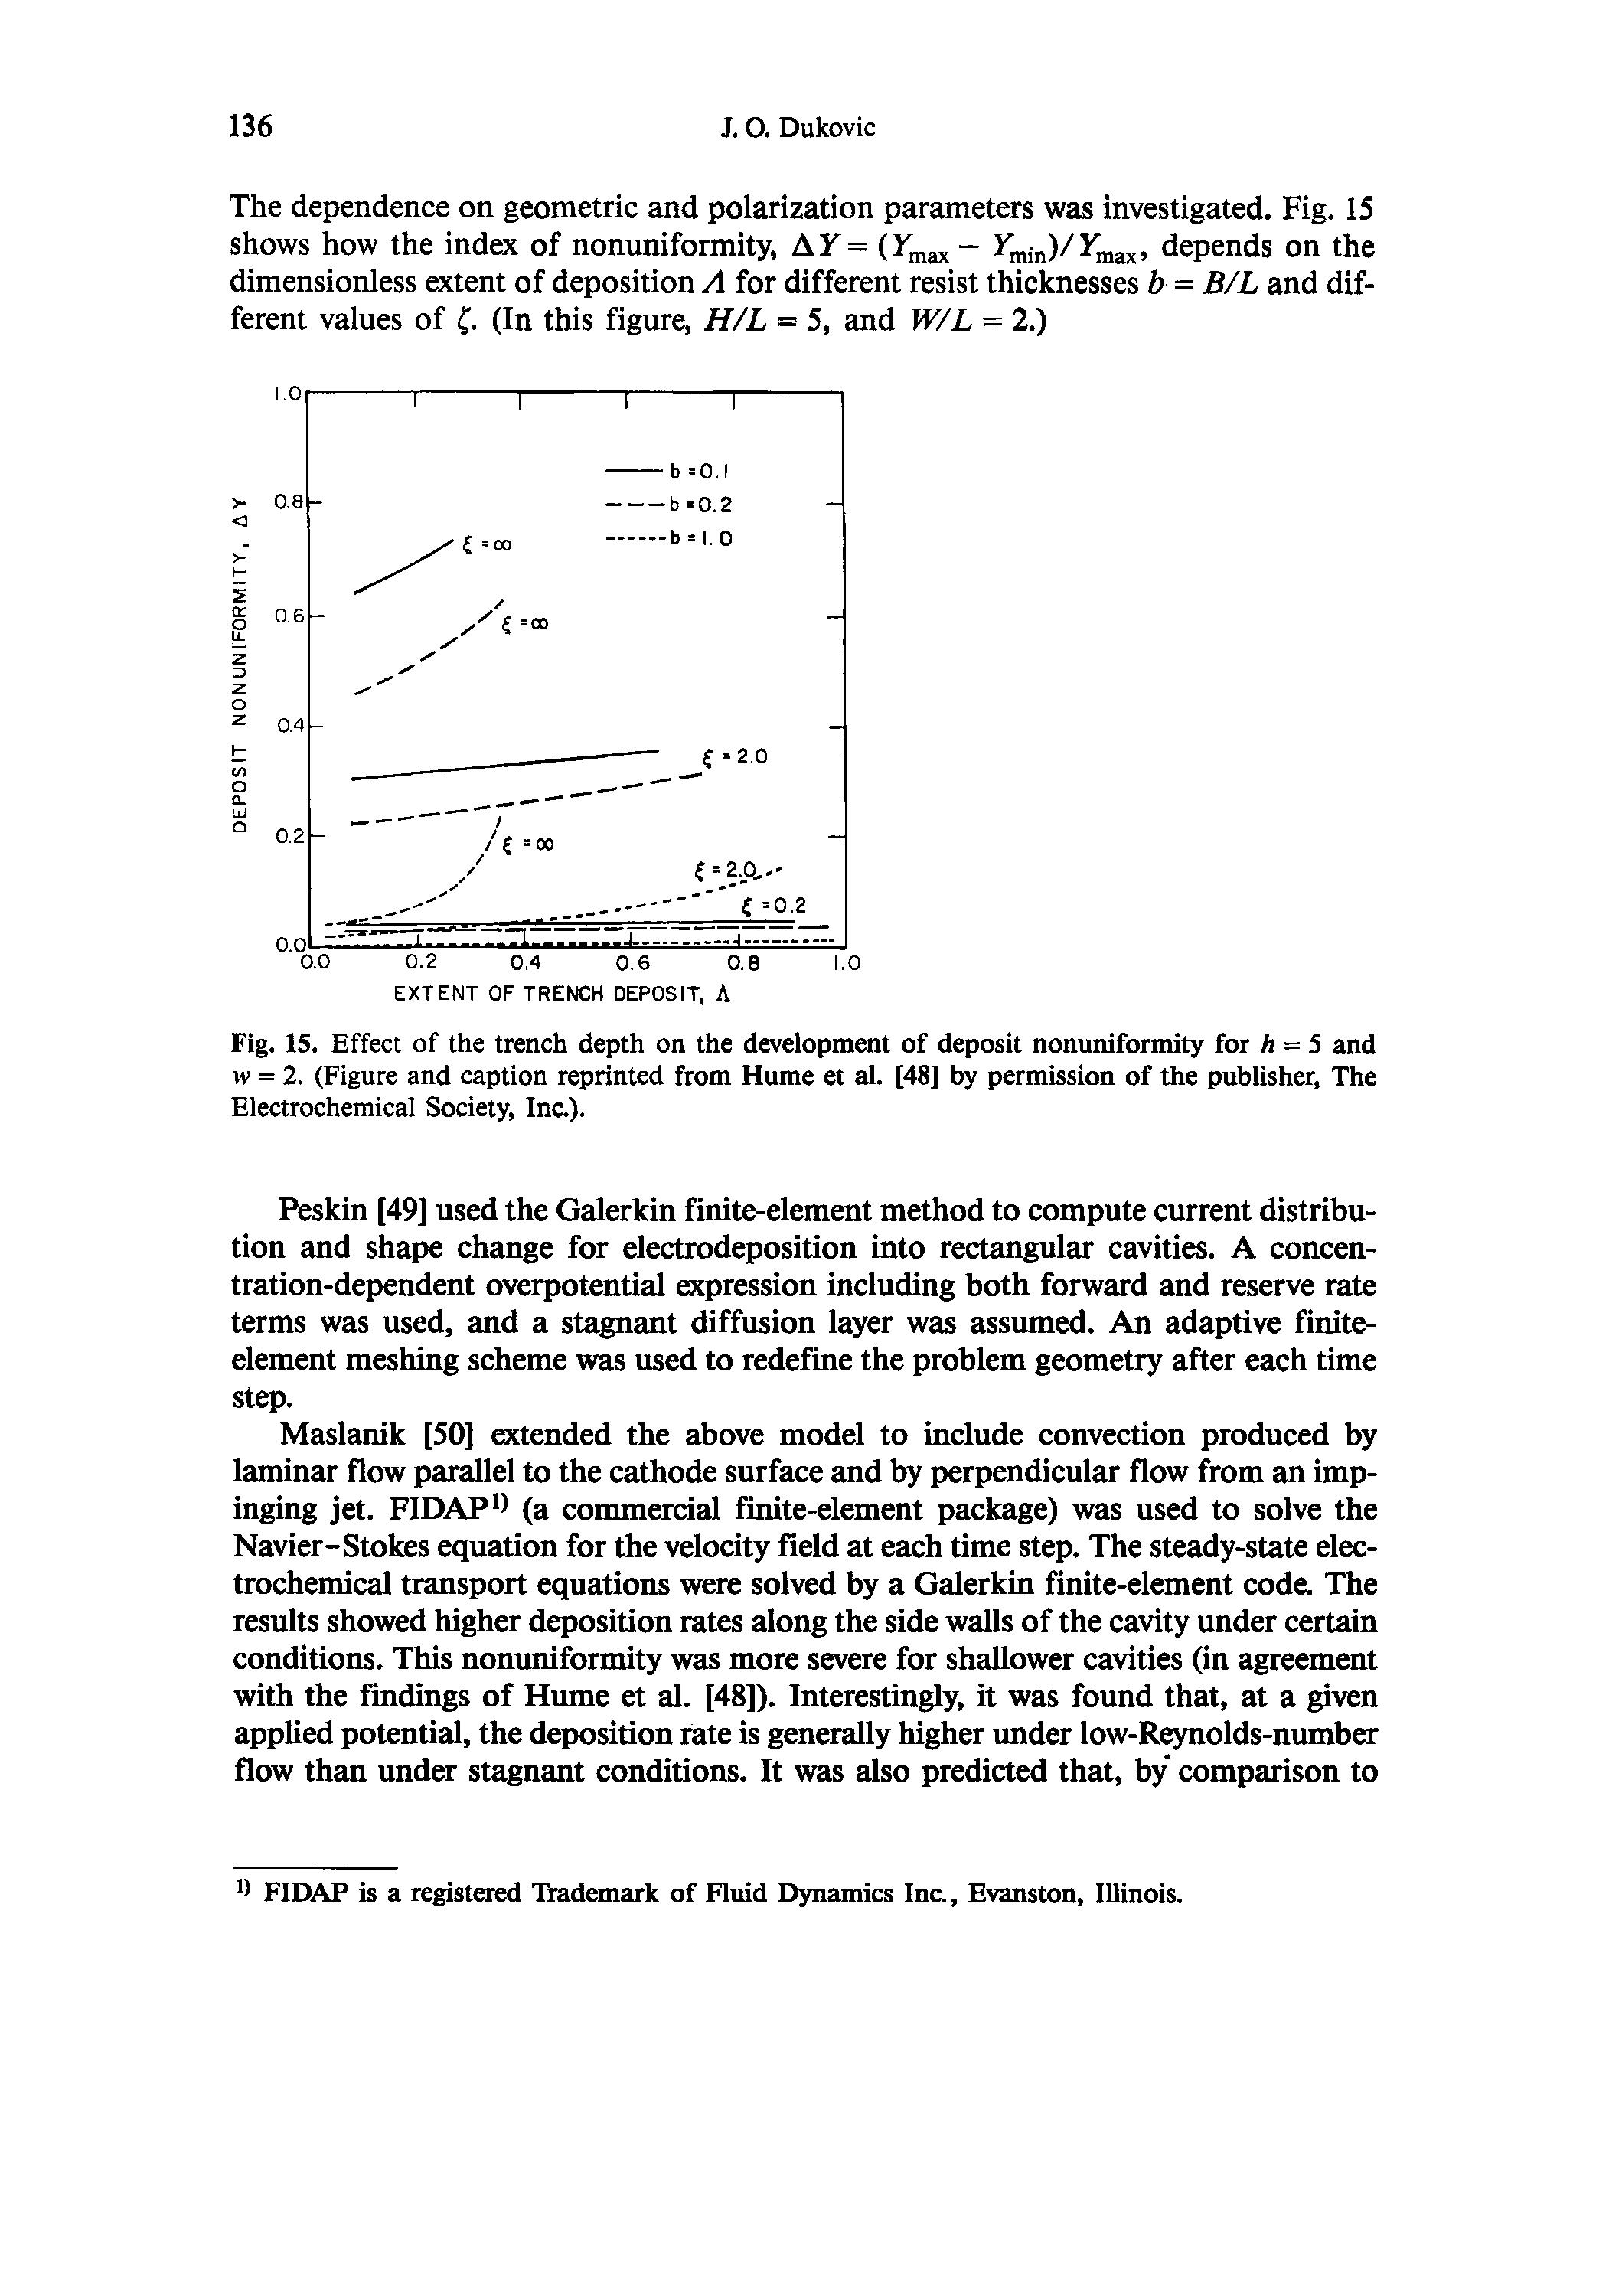 Fig. 15. Effect of the trench depth on the development of deposit nonuniformity for /i = 5 and w = 2. (Figure and caption reprinted from Hume et al. [48] by permission of the publisher, The Electrochemical Society, Inc.).